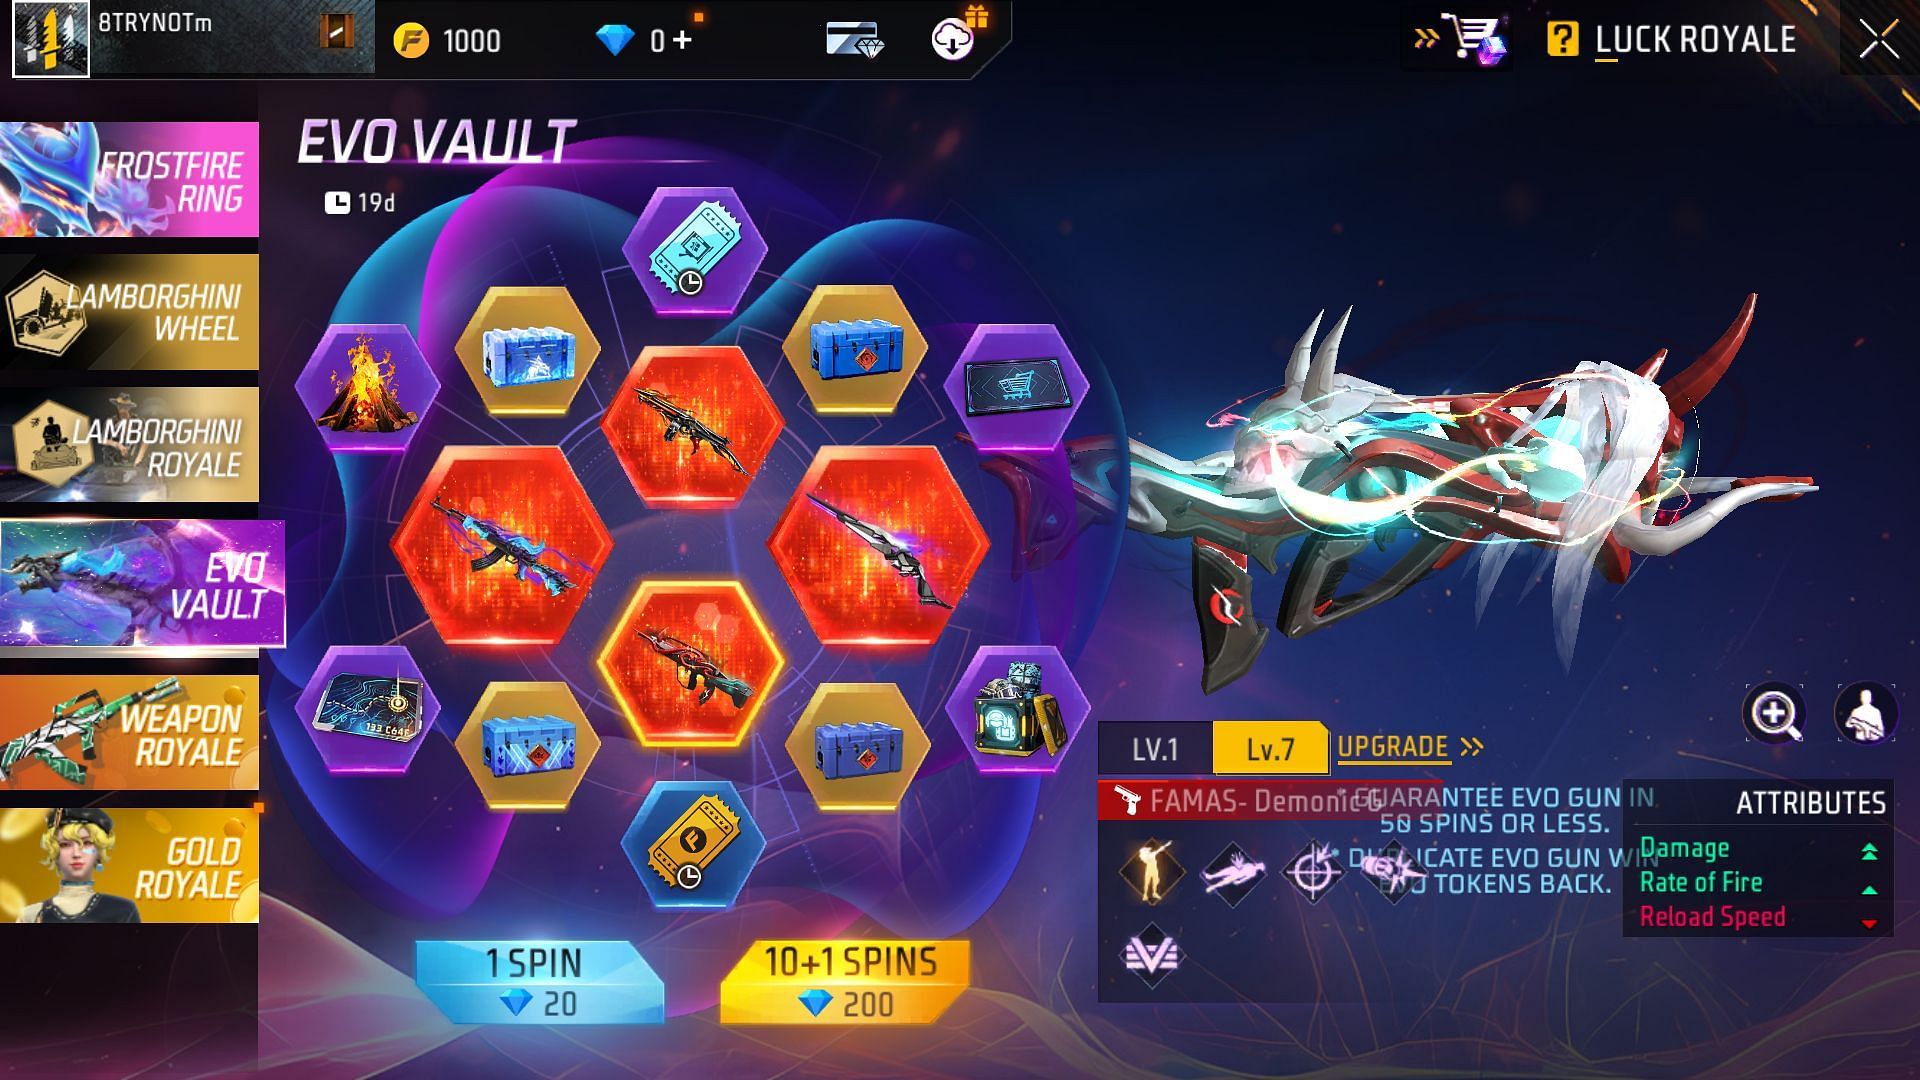 Here is the Evo Vault event that is currently active in the game (Image via Garena)